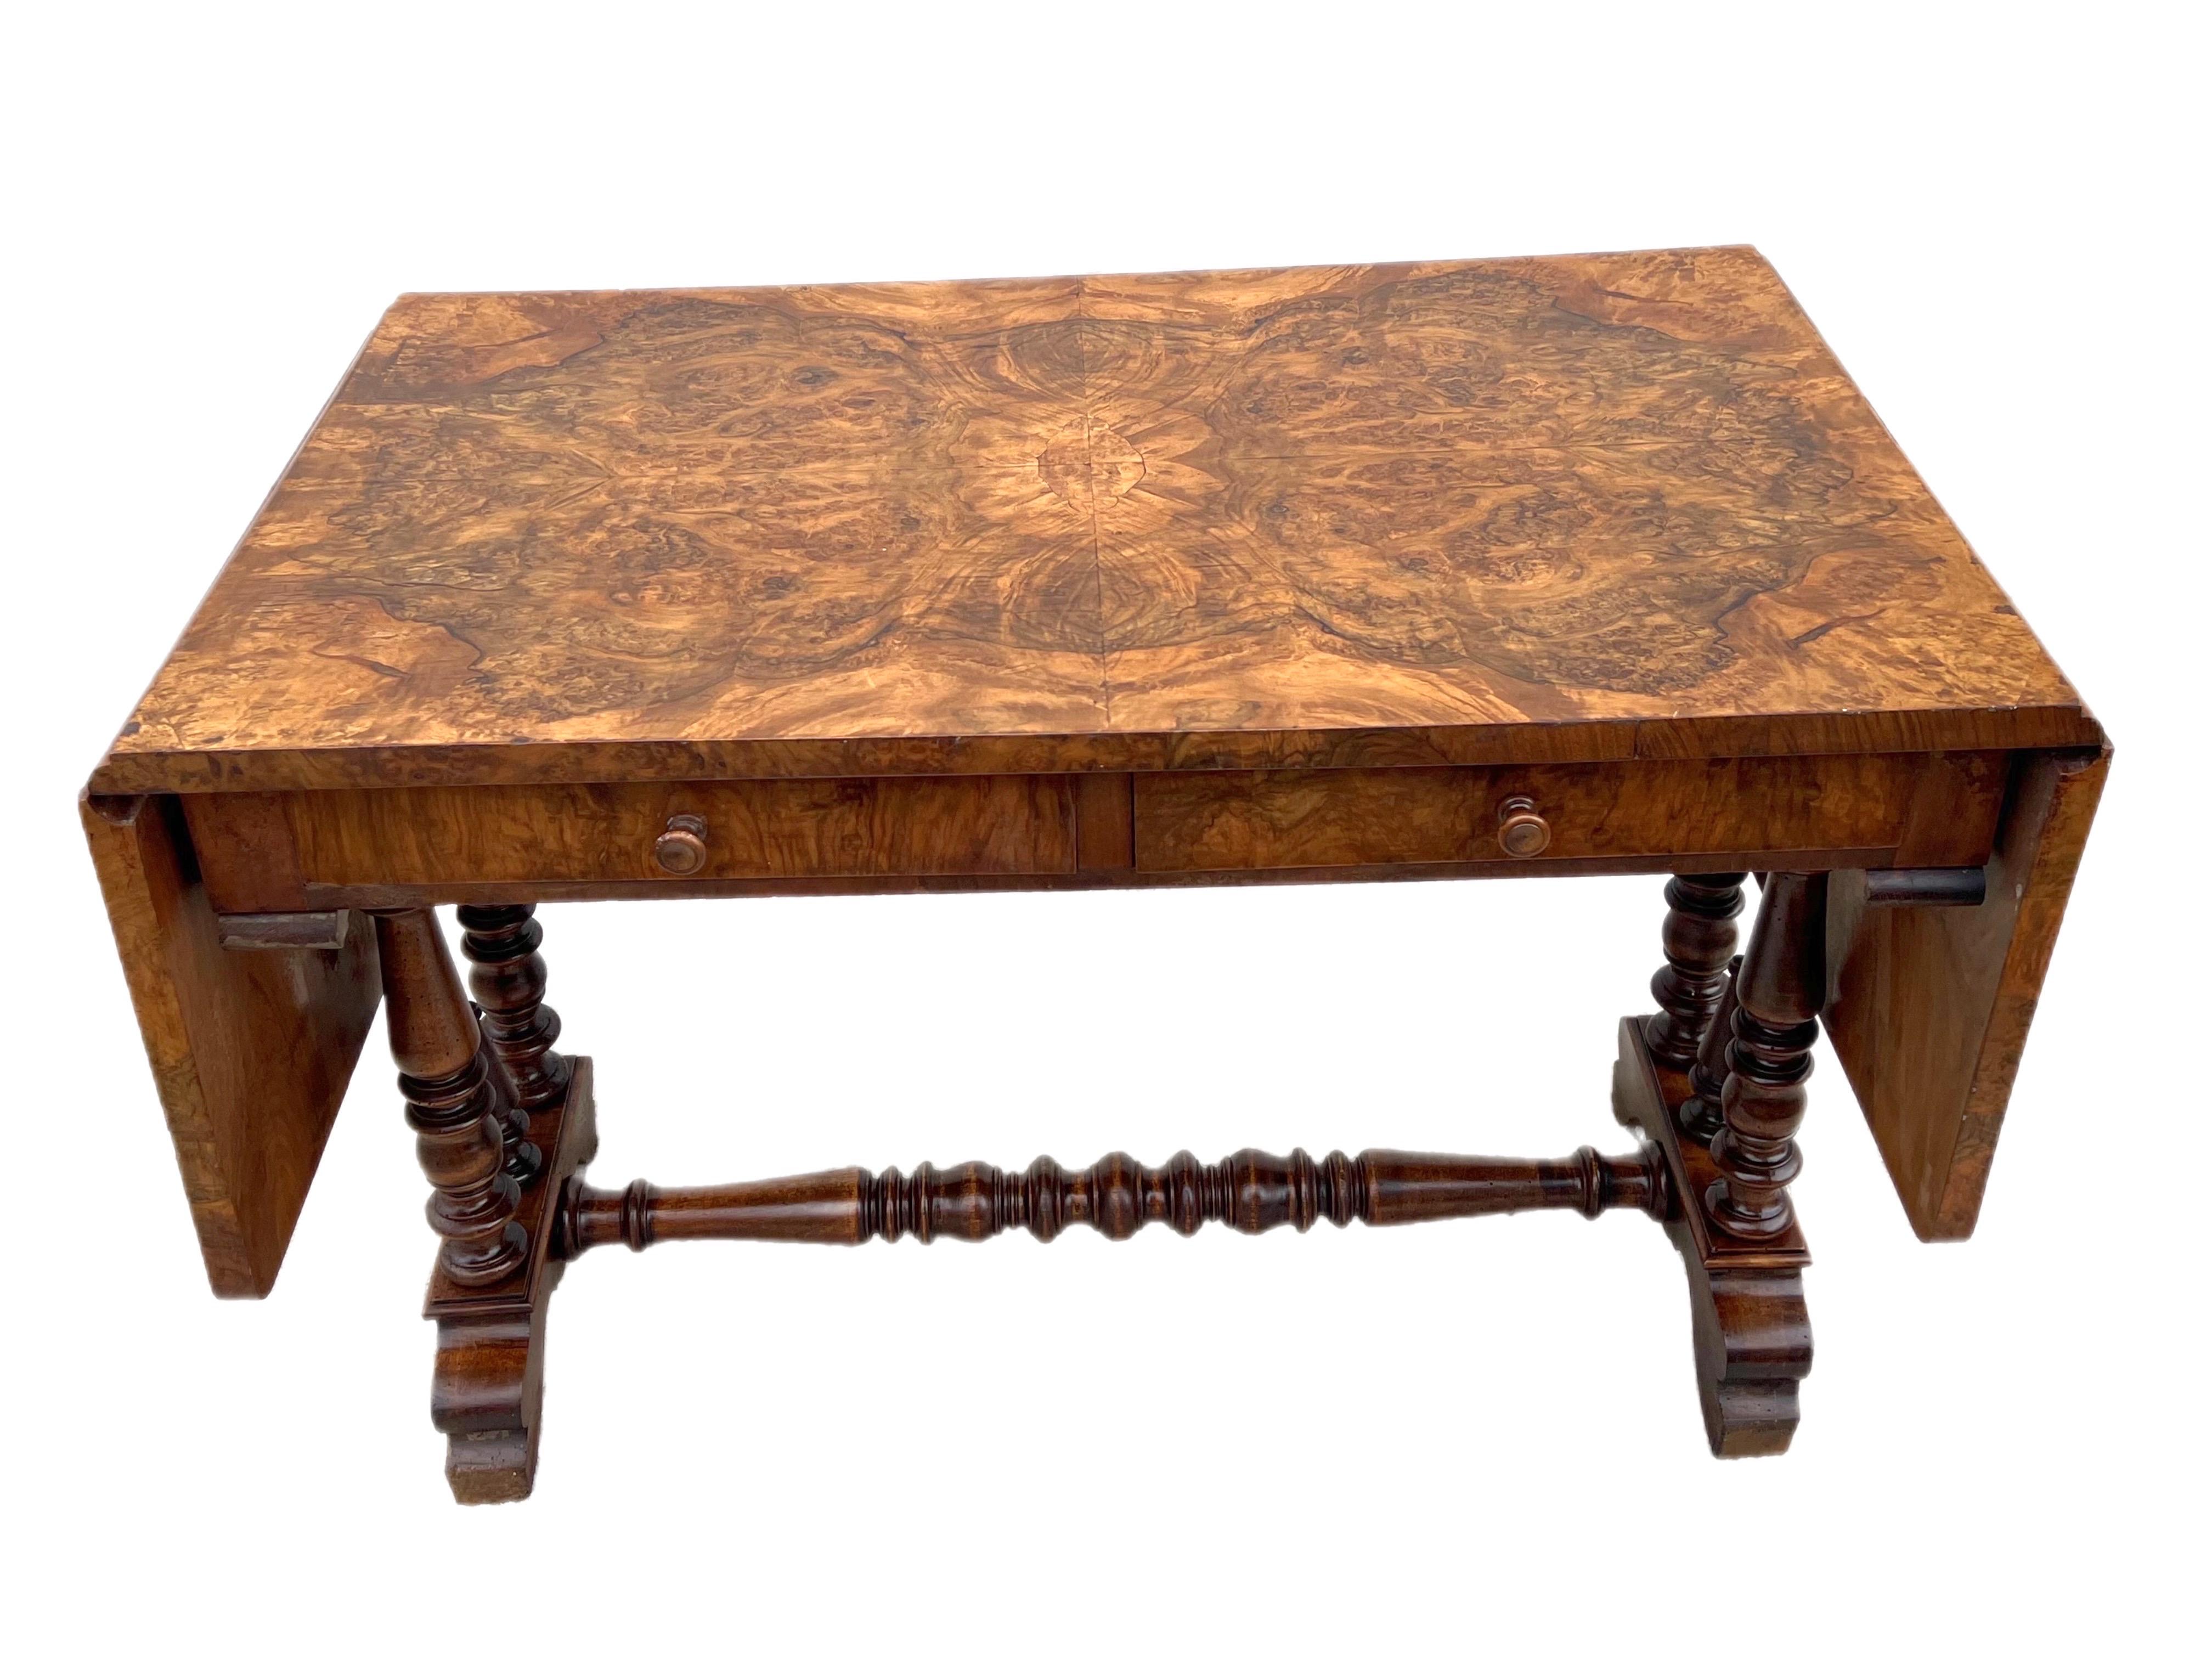 Fine quality antique walnut Victorian ‘Sutherland’ table in very good condition. These tables are very useful and were very popular in Victorian times. This table is one of the better examples and has a lot of fine details. The tabletop is burr